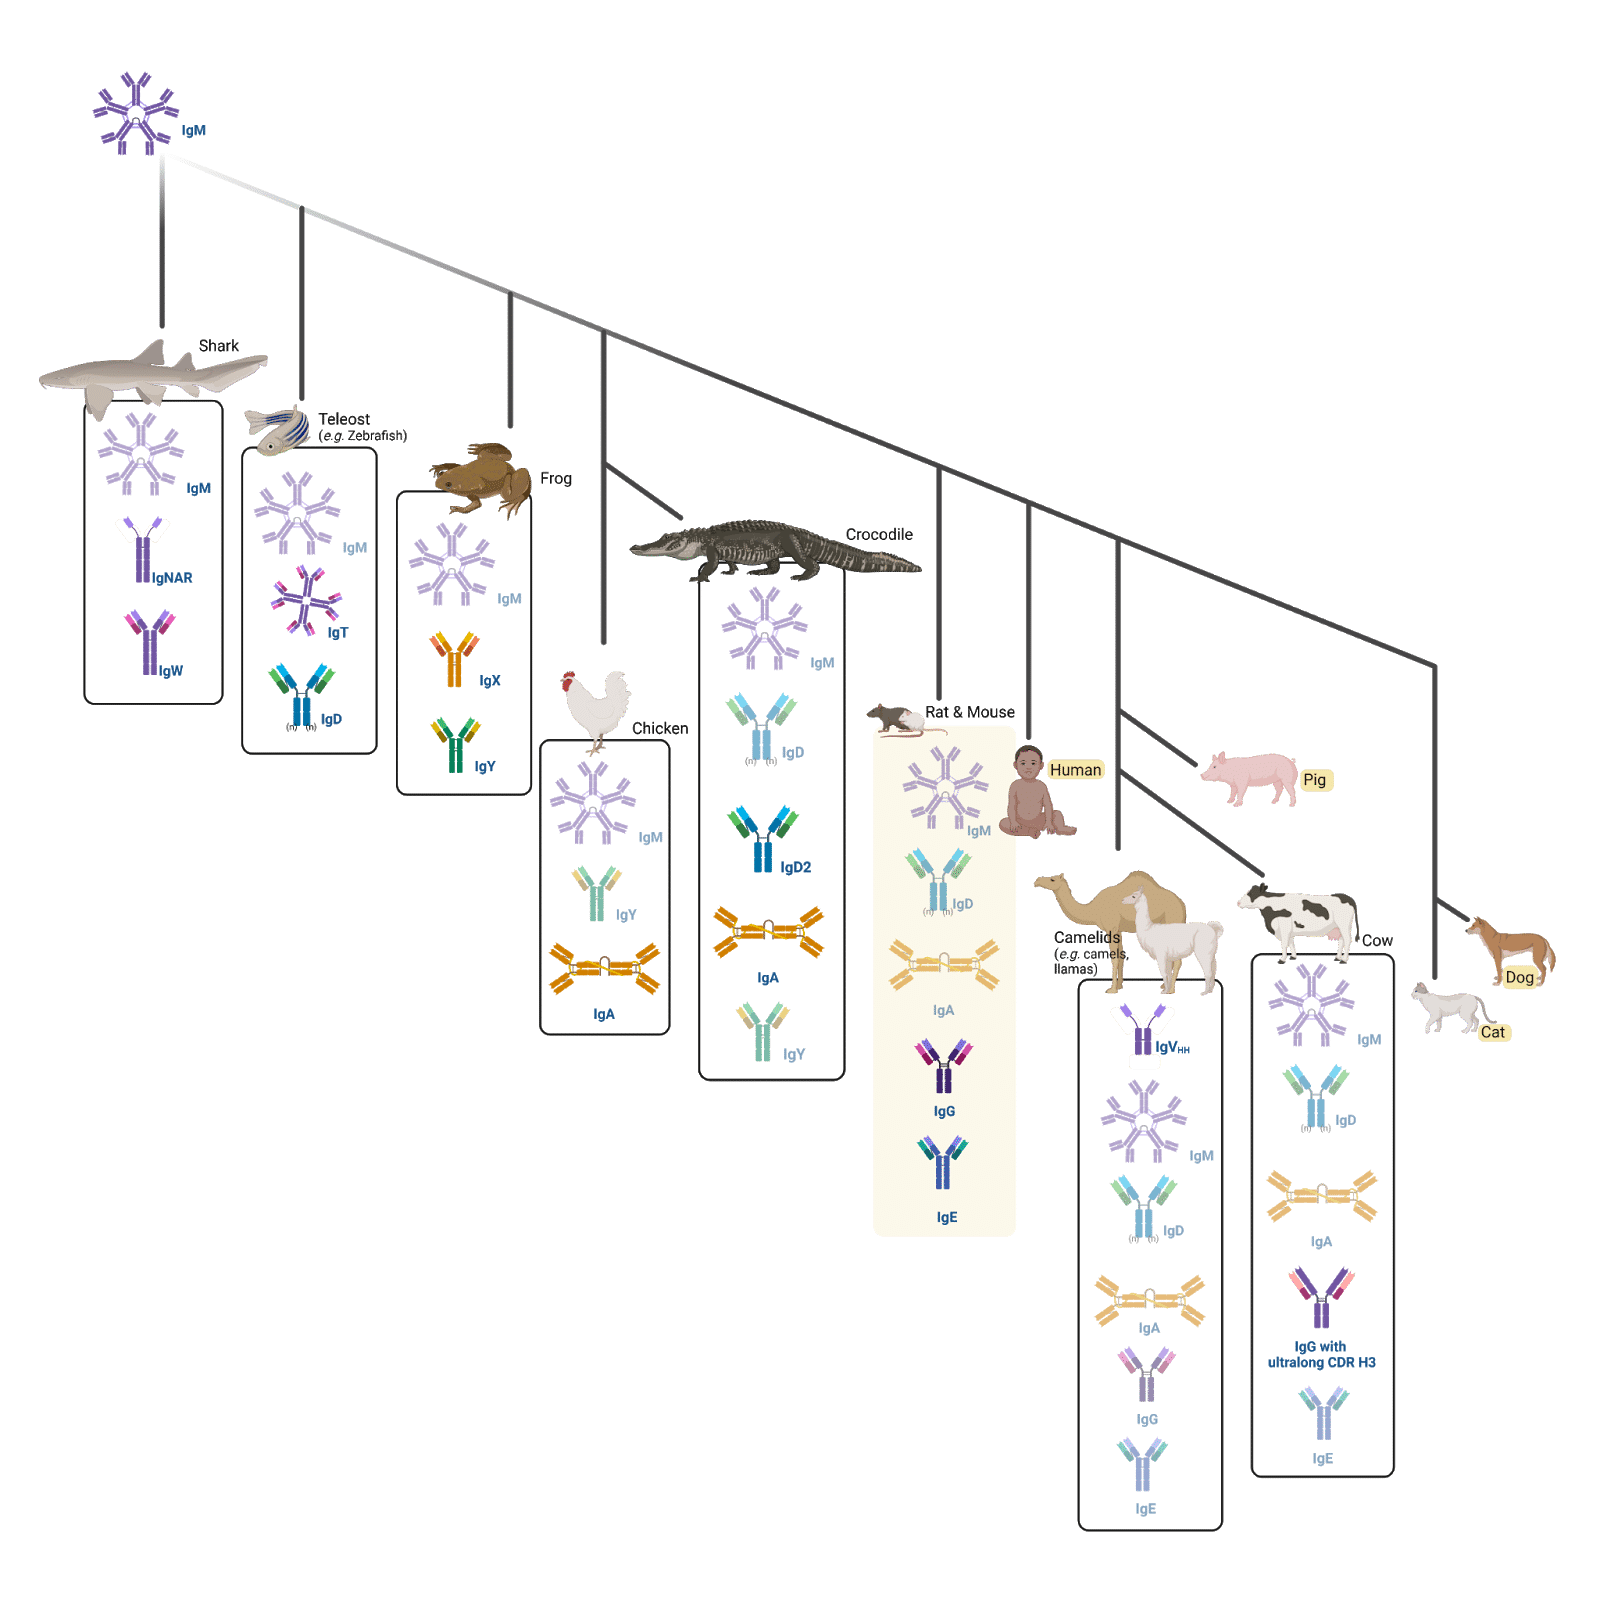 Infographic displaying a phylogenetic tree showing the natural evolution of immunoglobulins across different animals